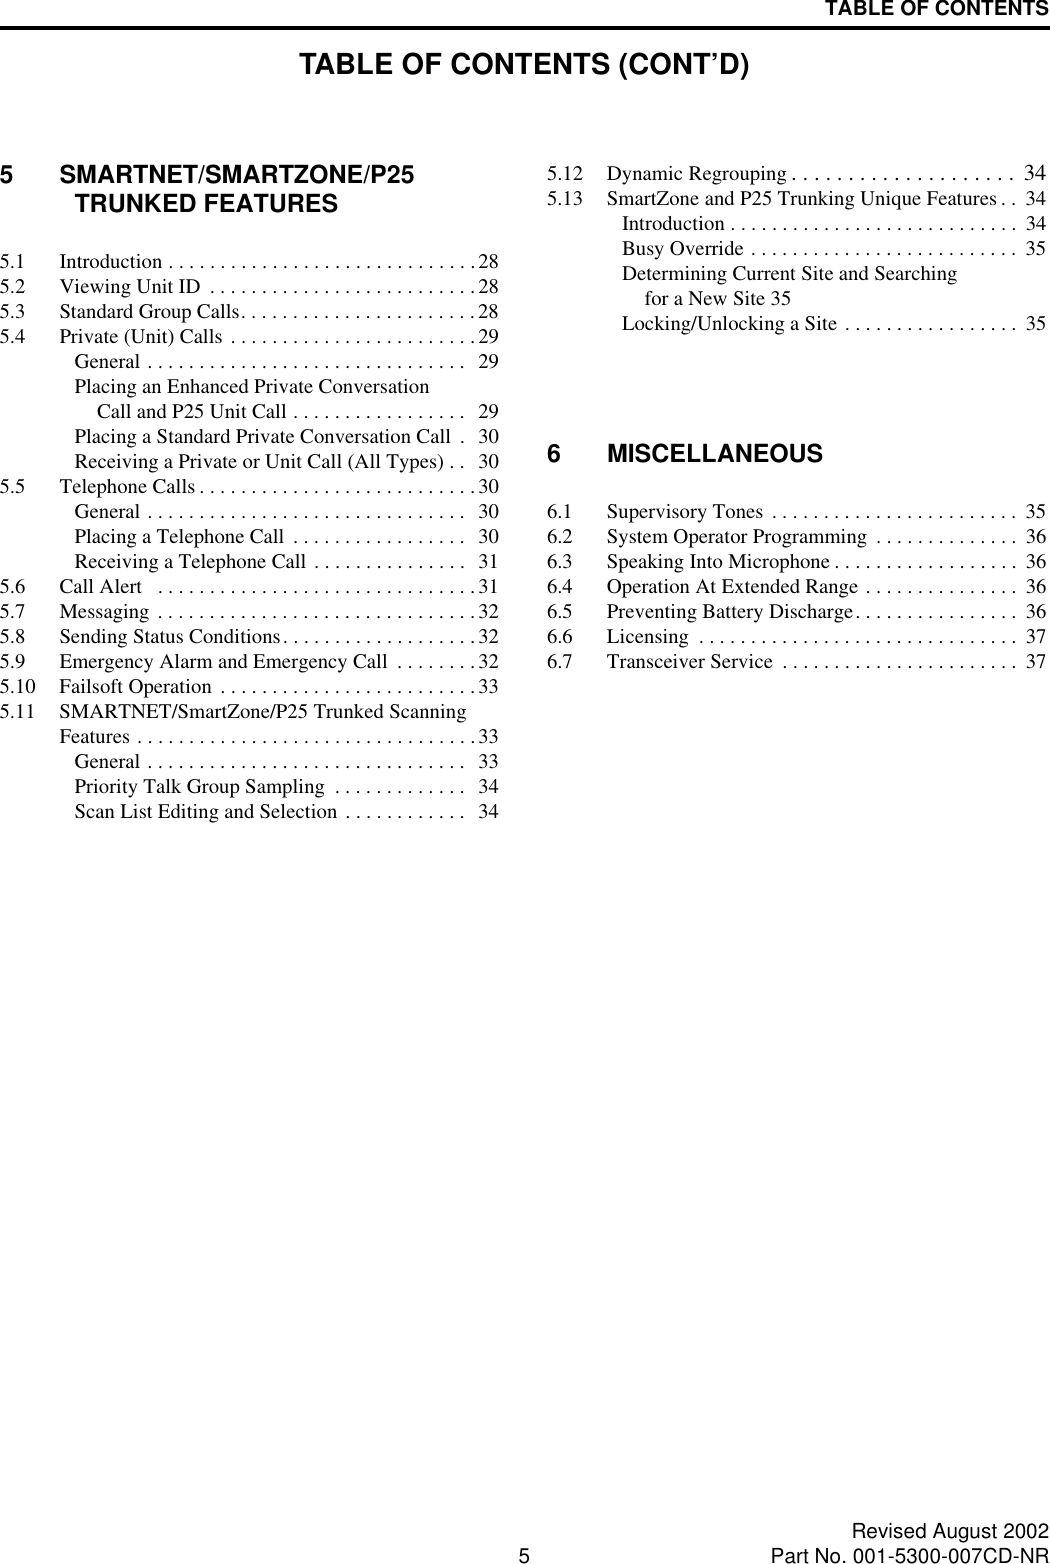 TABLE OF CONTENTS5Revised August 2002Part No. 001-5300-007CD-NR5 SMARTNET/SMARTZONE/P25 TRUNKED FEATURES5.1 Introduction . . . . . . . . . . . . . . . . . . . . . . . . . . . . . .285.2 Viewing Unit ID  . . . . . . . . . . . . . . . . . . . . . . . . . .285.3 Standard Group Calls. . . . . . . . . . . . . . . . . . . . . . .285.4 Private (Unit) Calls . . . . . . . . . . . . . . . . . . . . . . . .29General . . . . . . . . . . . . . . . . . . . . . . . . . . . . . . .   29Placing an Enhanced Private ConversationCall and P25 Unit Call . . . . . . . . . . . . . . . . .  29Placing a Standard Private Conversation Call  .  30Receiving a Private or Unit Call (All Types) . .  305.5 Telephone Calls . . . . . . . . . . . . . . . . . . . . . . . . . . .30General . . . . . . . . . . . . . . . . . . . . . . . . . . . . . . .   30Placing a Telephone Call  . . . . . . . . . . . . . . . . .  30Receiving a Telephone Call . . . . . . . . . . . . . . .  315.6 Call Alert   . . . . . . . . . . . . . . . . . . . . . . . . . . . . . . . 315.7 Messaging . . . . . . . . . . . . . . . . . . . . . . . . . . . . . . . 325.8 Sending Status Conditions. . . . . . . . . . . . . . . . . . .325.9 Emergency Alarm and Emergency Call  . . . . . . . .325.10 Failsoft Operation  . . . . . . . . . . . . . . . . . . . . . . . . .335.11 SMARTNET/SmartZone/P25 Trunked Scanning Features . . . . . . . . . . . . . . . . . . . . . . . . . . . . . . . . .33General . . . . . . . . . . . . . . . . . . . . . . . . . . . . . . .   33Priority Talk Group Sampling  . . . . . . . . . . . . .  34Scan List Editing and Selection . . . . . . . . . . . .  345.12 Dynamic Regrouping . . . . . . . . . . . . . . . . . . . .  345.13 SmartZone and P25 Trunking Unique Features . .  34Introduction . . . . . . . . . . . . . . . . . . . . . . . . . . . .  34Busy Override . . . . . . . . . . . . . . . . . . . . . . . . . .  35Determining Current Site and Searching for a New Site 35Locking/Unlocking a Site . . . . . . . . . . . . . . . . .  356 MISCELLANEOUS6.1 Supervisory Tones . . . . . . . . . . . . . . . . . . . . . . . .  356.2 System Operator Programming  . . . . . . . . . . . . . .  366.3 Speaking Into Microphone . . . . . . . . . . . . . . . . . .  366.4 Operation At Extended Range . . . . . . . . . . . . . . .  366.5 Preventing Battery Discharge. . . . . . . . . . . . . . . .  366.6 Licensing  . . . . . . . . . . . . . . . . . . . . . . . . . . . . . . .  376.7 Transceiver Service  . . . . . . . . . . . . . . . . . . . . . . .  37TABLE OF CONTENTS (CONT’D)